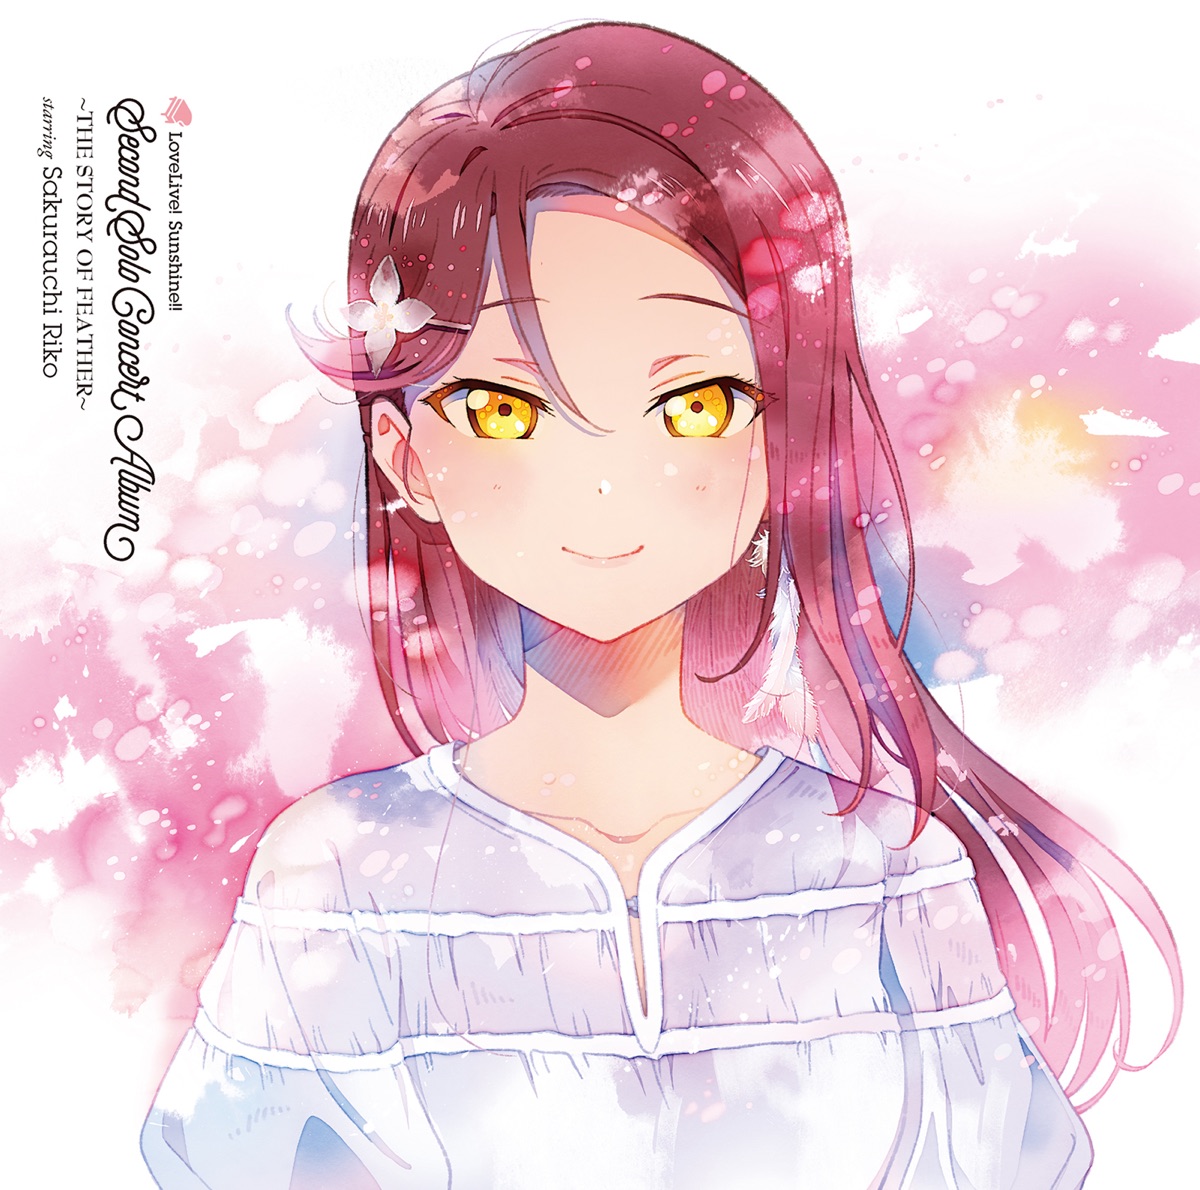 Cover art for『Riko Sakurauchi (Rikako Aida) from Aqours - Love Spiral Tower』from the release『LoveLive! Sunshine!! Second Solo Concert Album ～THE STORY OF FEATHER～ starring Sakurauchi Riko